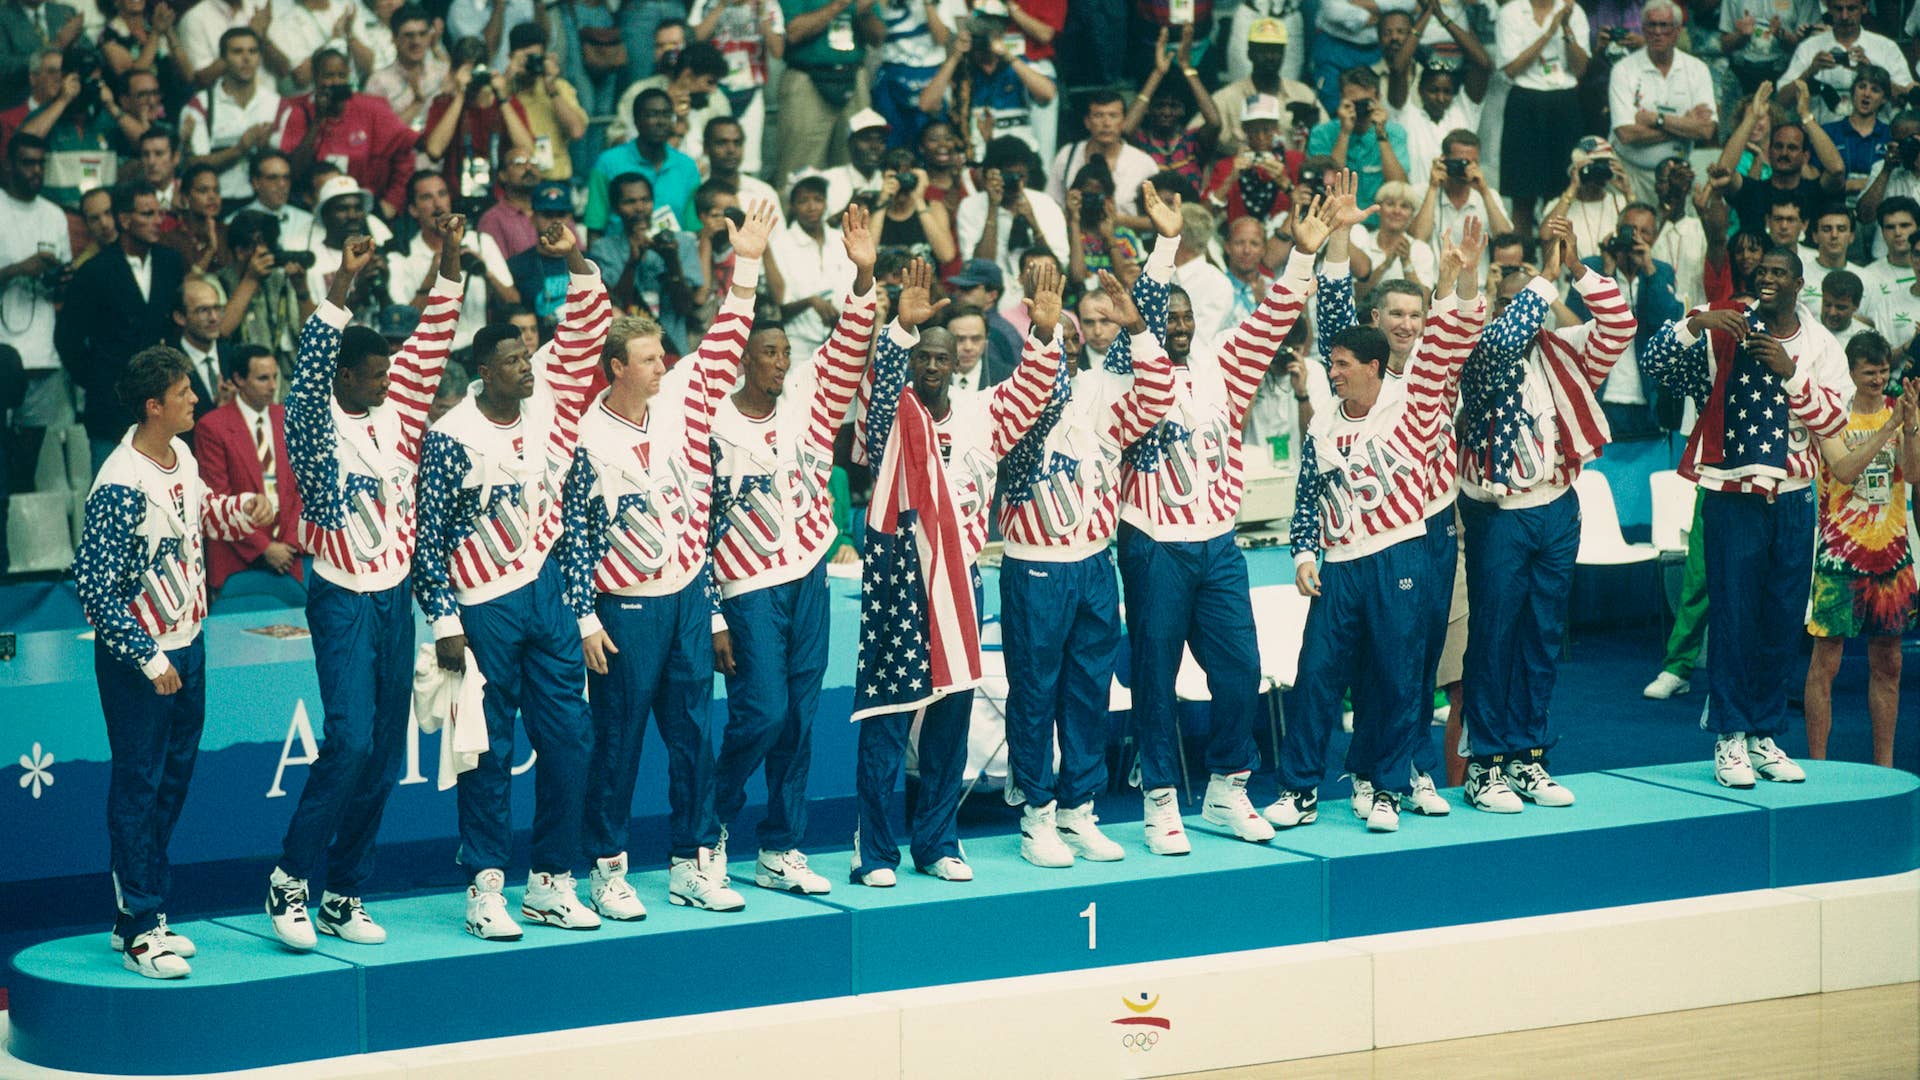 American basketball players of the Dream Team